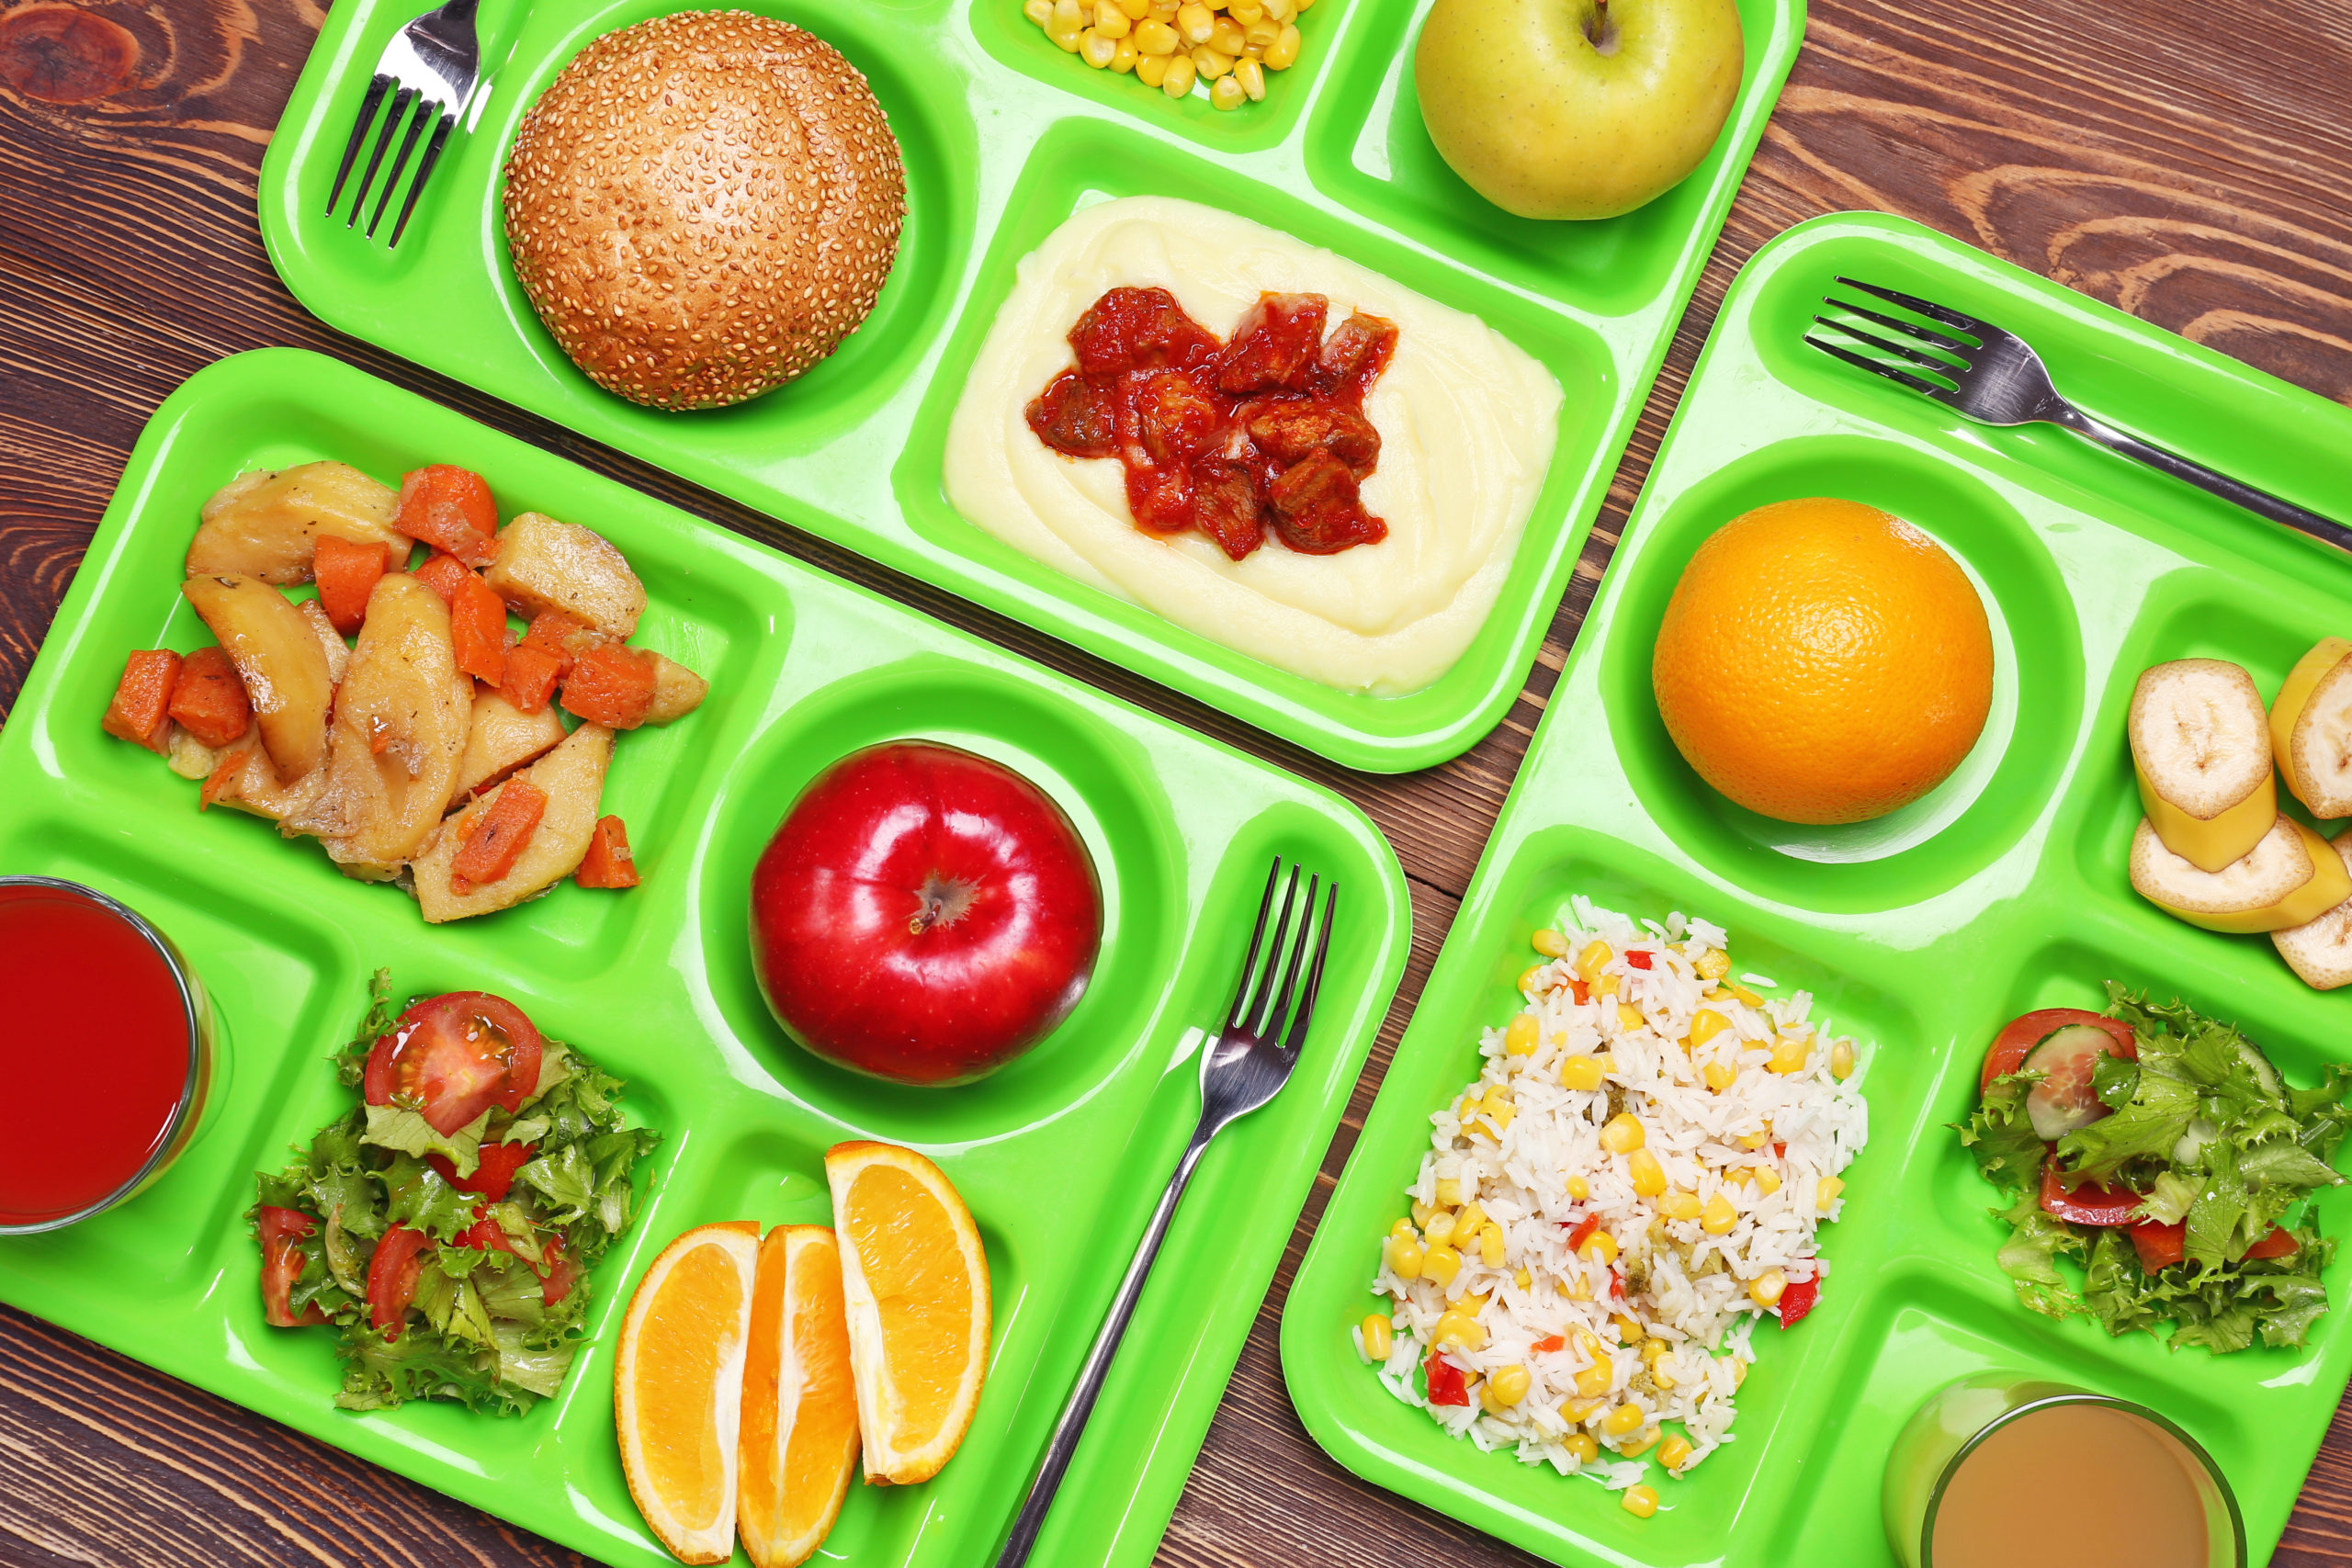 Serving trays with delicious food on table. Concept of school lunch